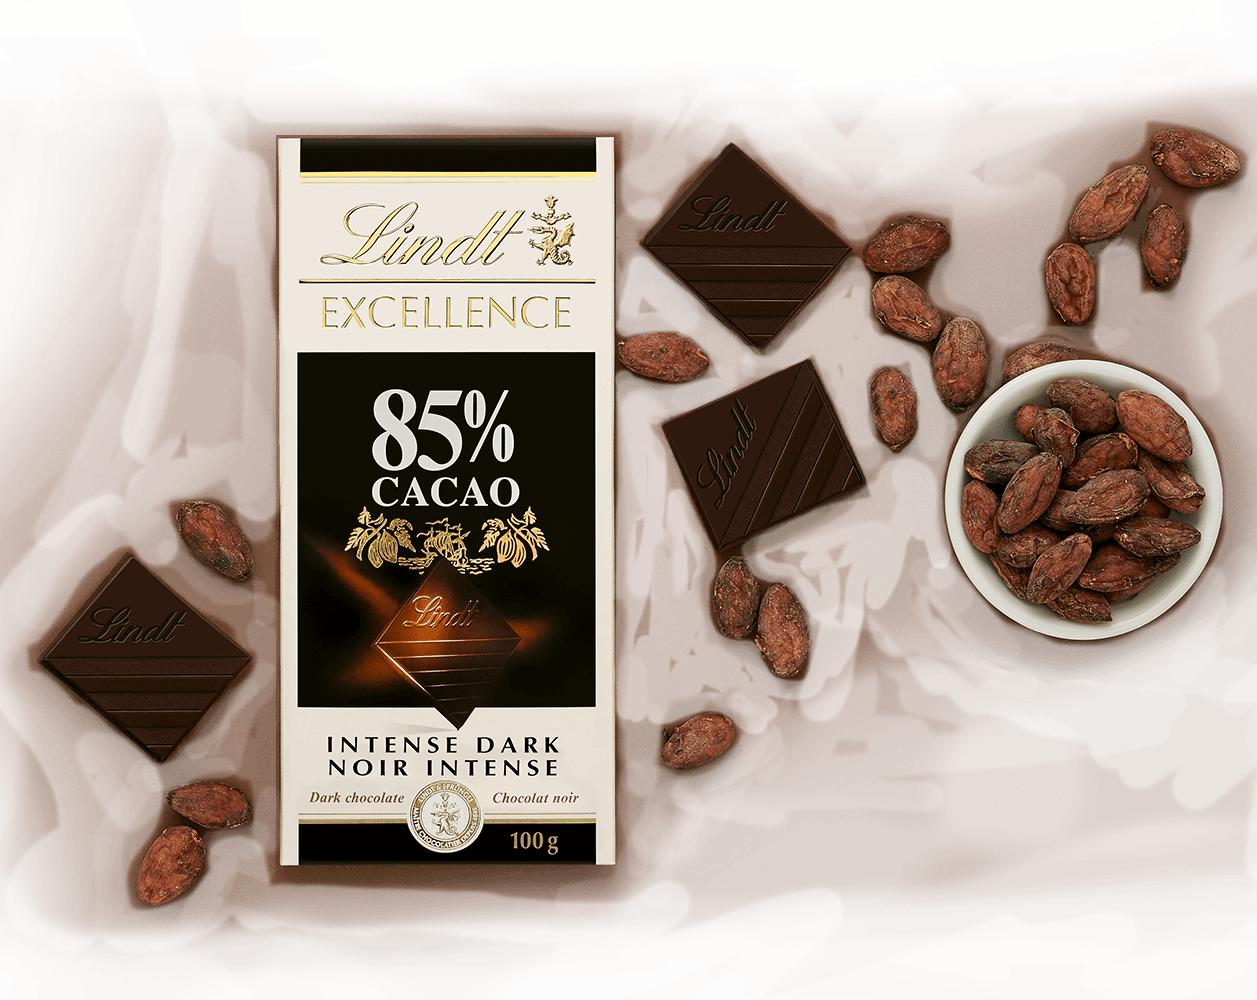 🥬 Only a True Vegan Can Tell If These Snacks Are Actually Vegan or Not Lindt Dark Chocolate